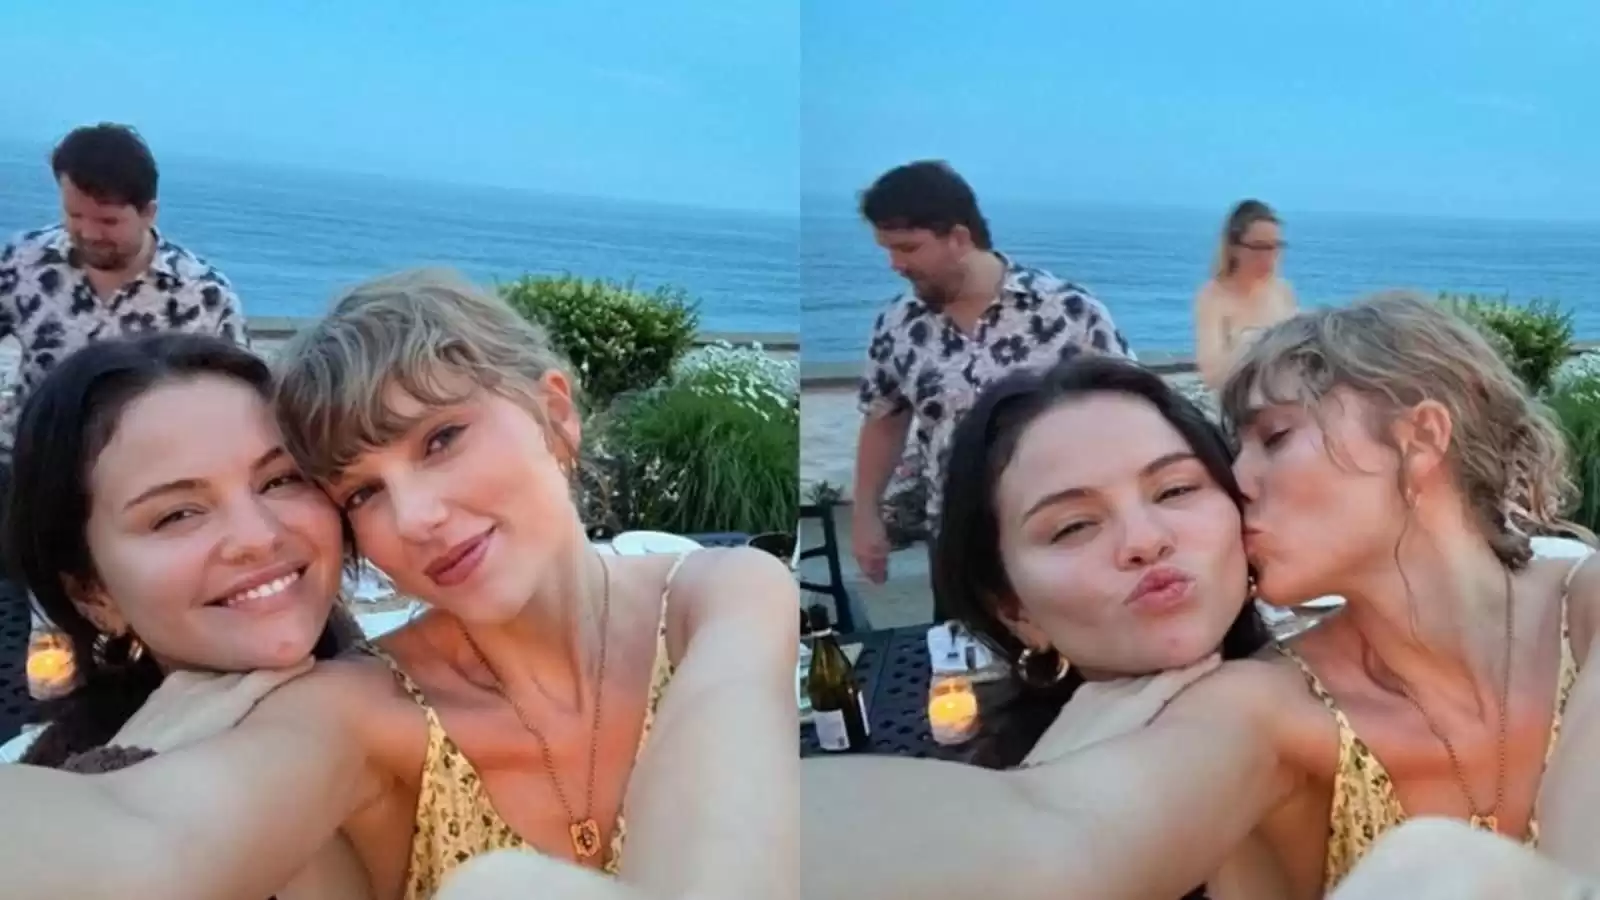 She a real bad, Selena Gomez posts adorable vacay selfie with BFF Taylor Swift